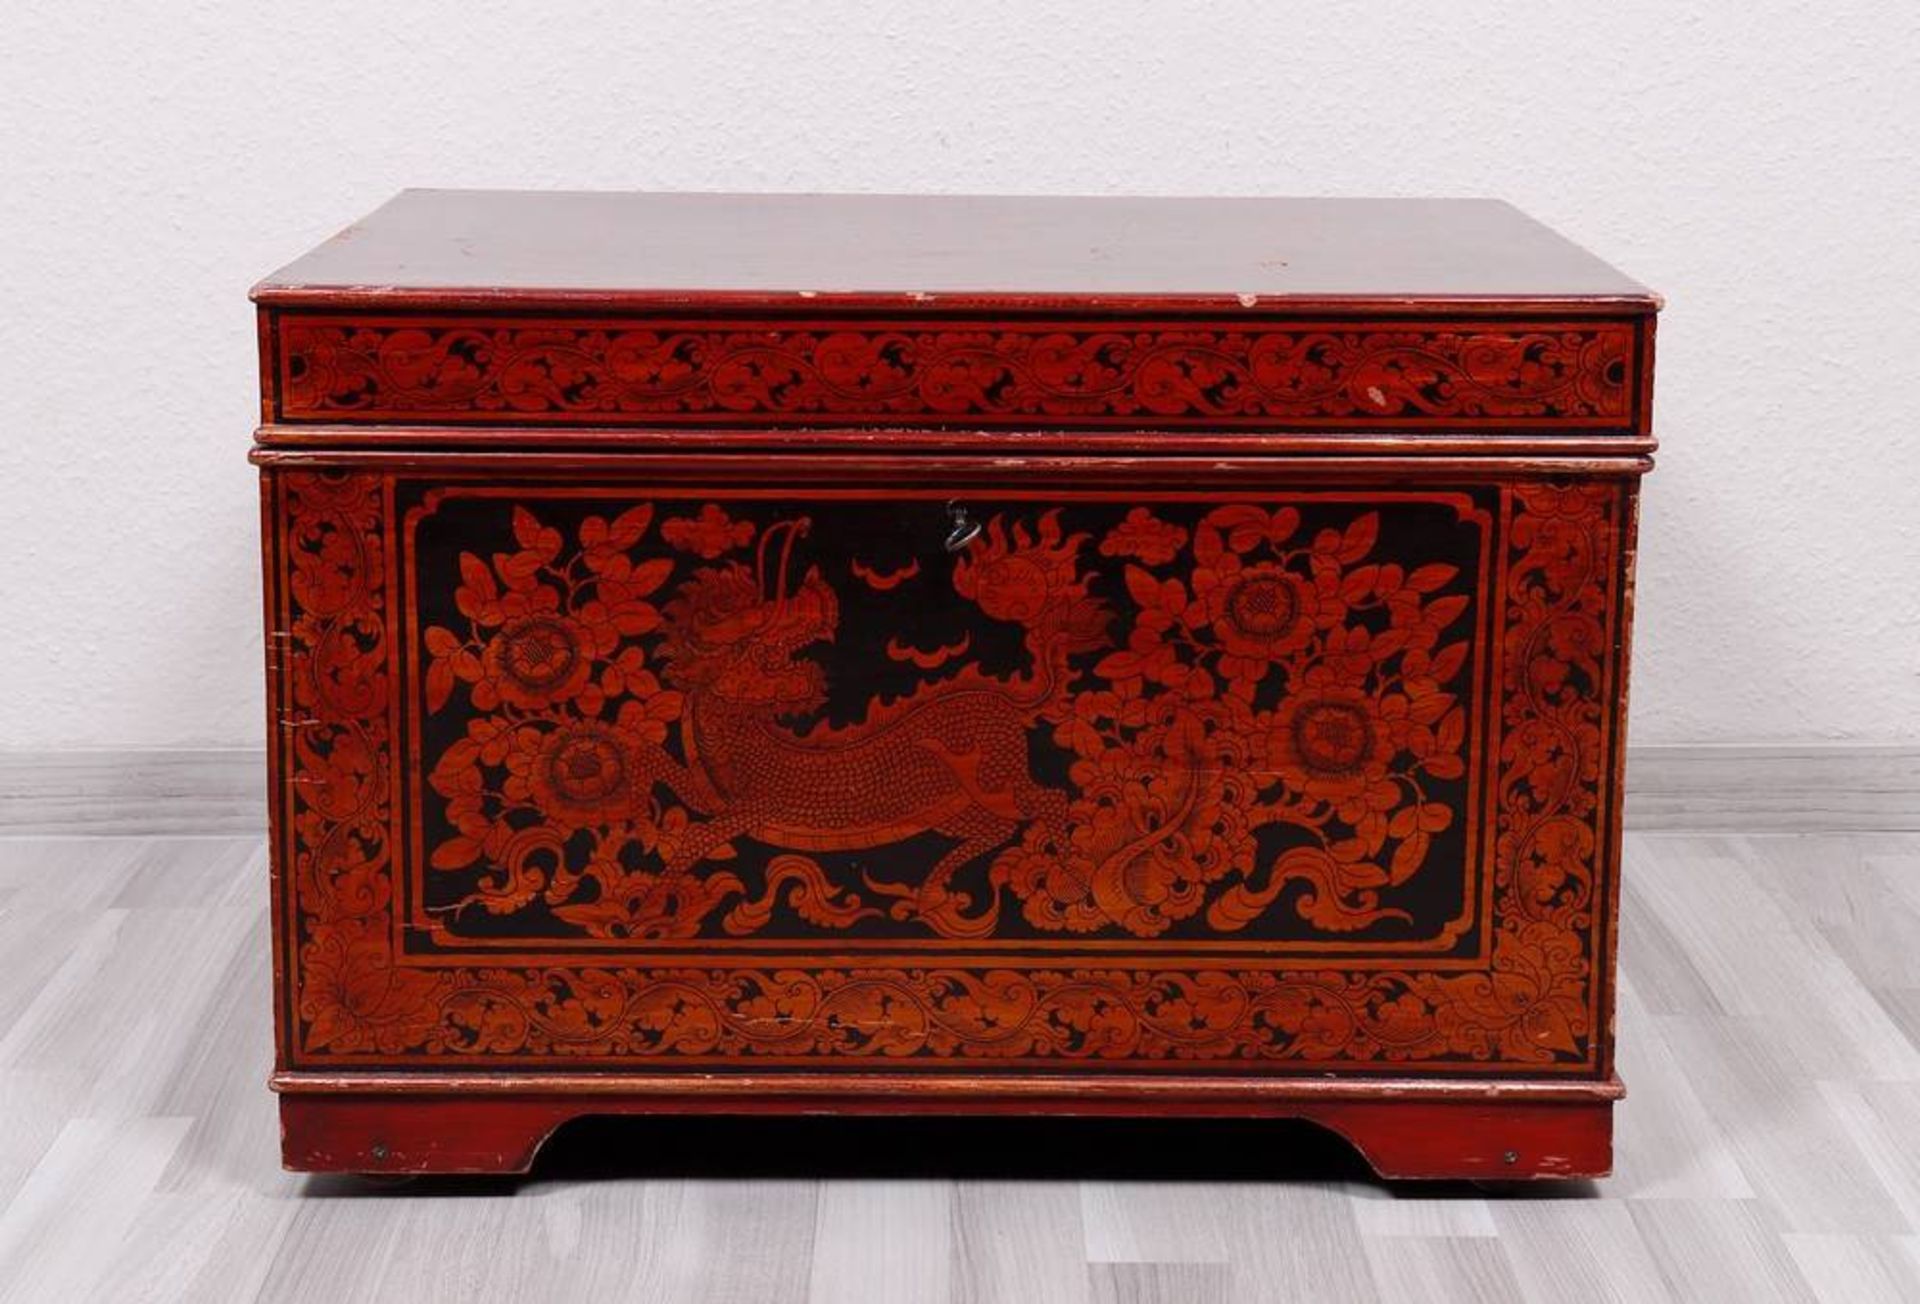 Wedding chest, China, probably 1st half 20th C. - Image 2 of 4